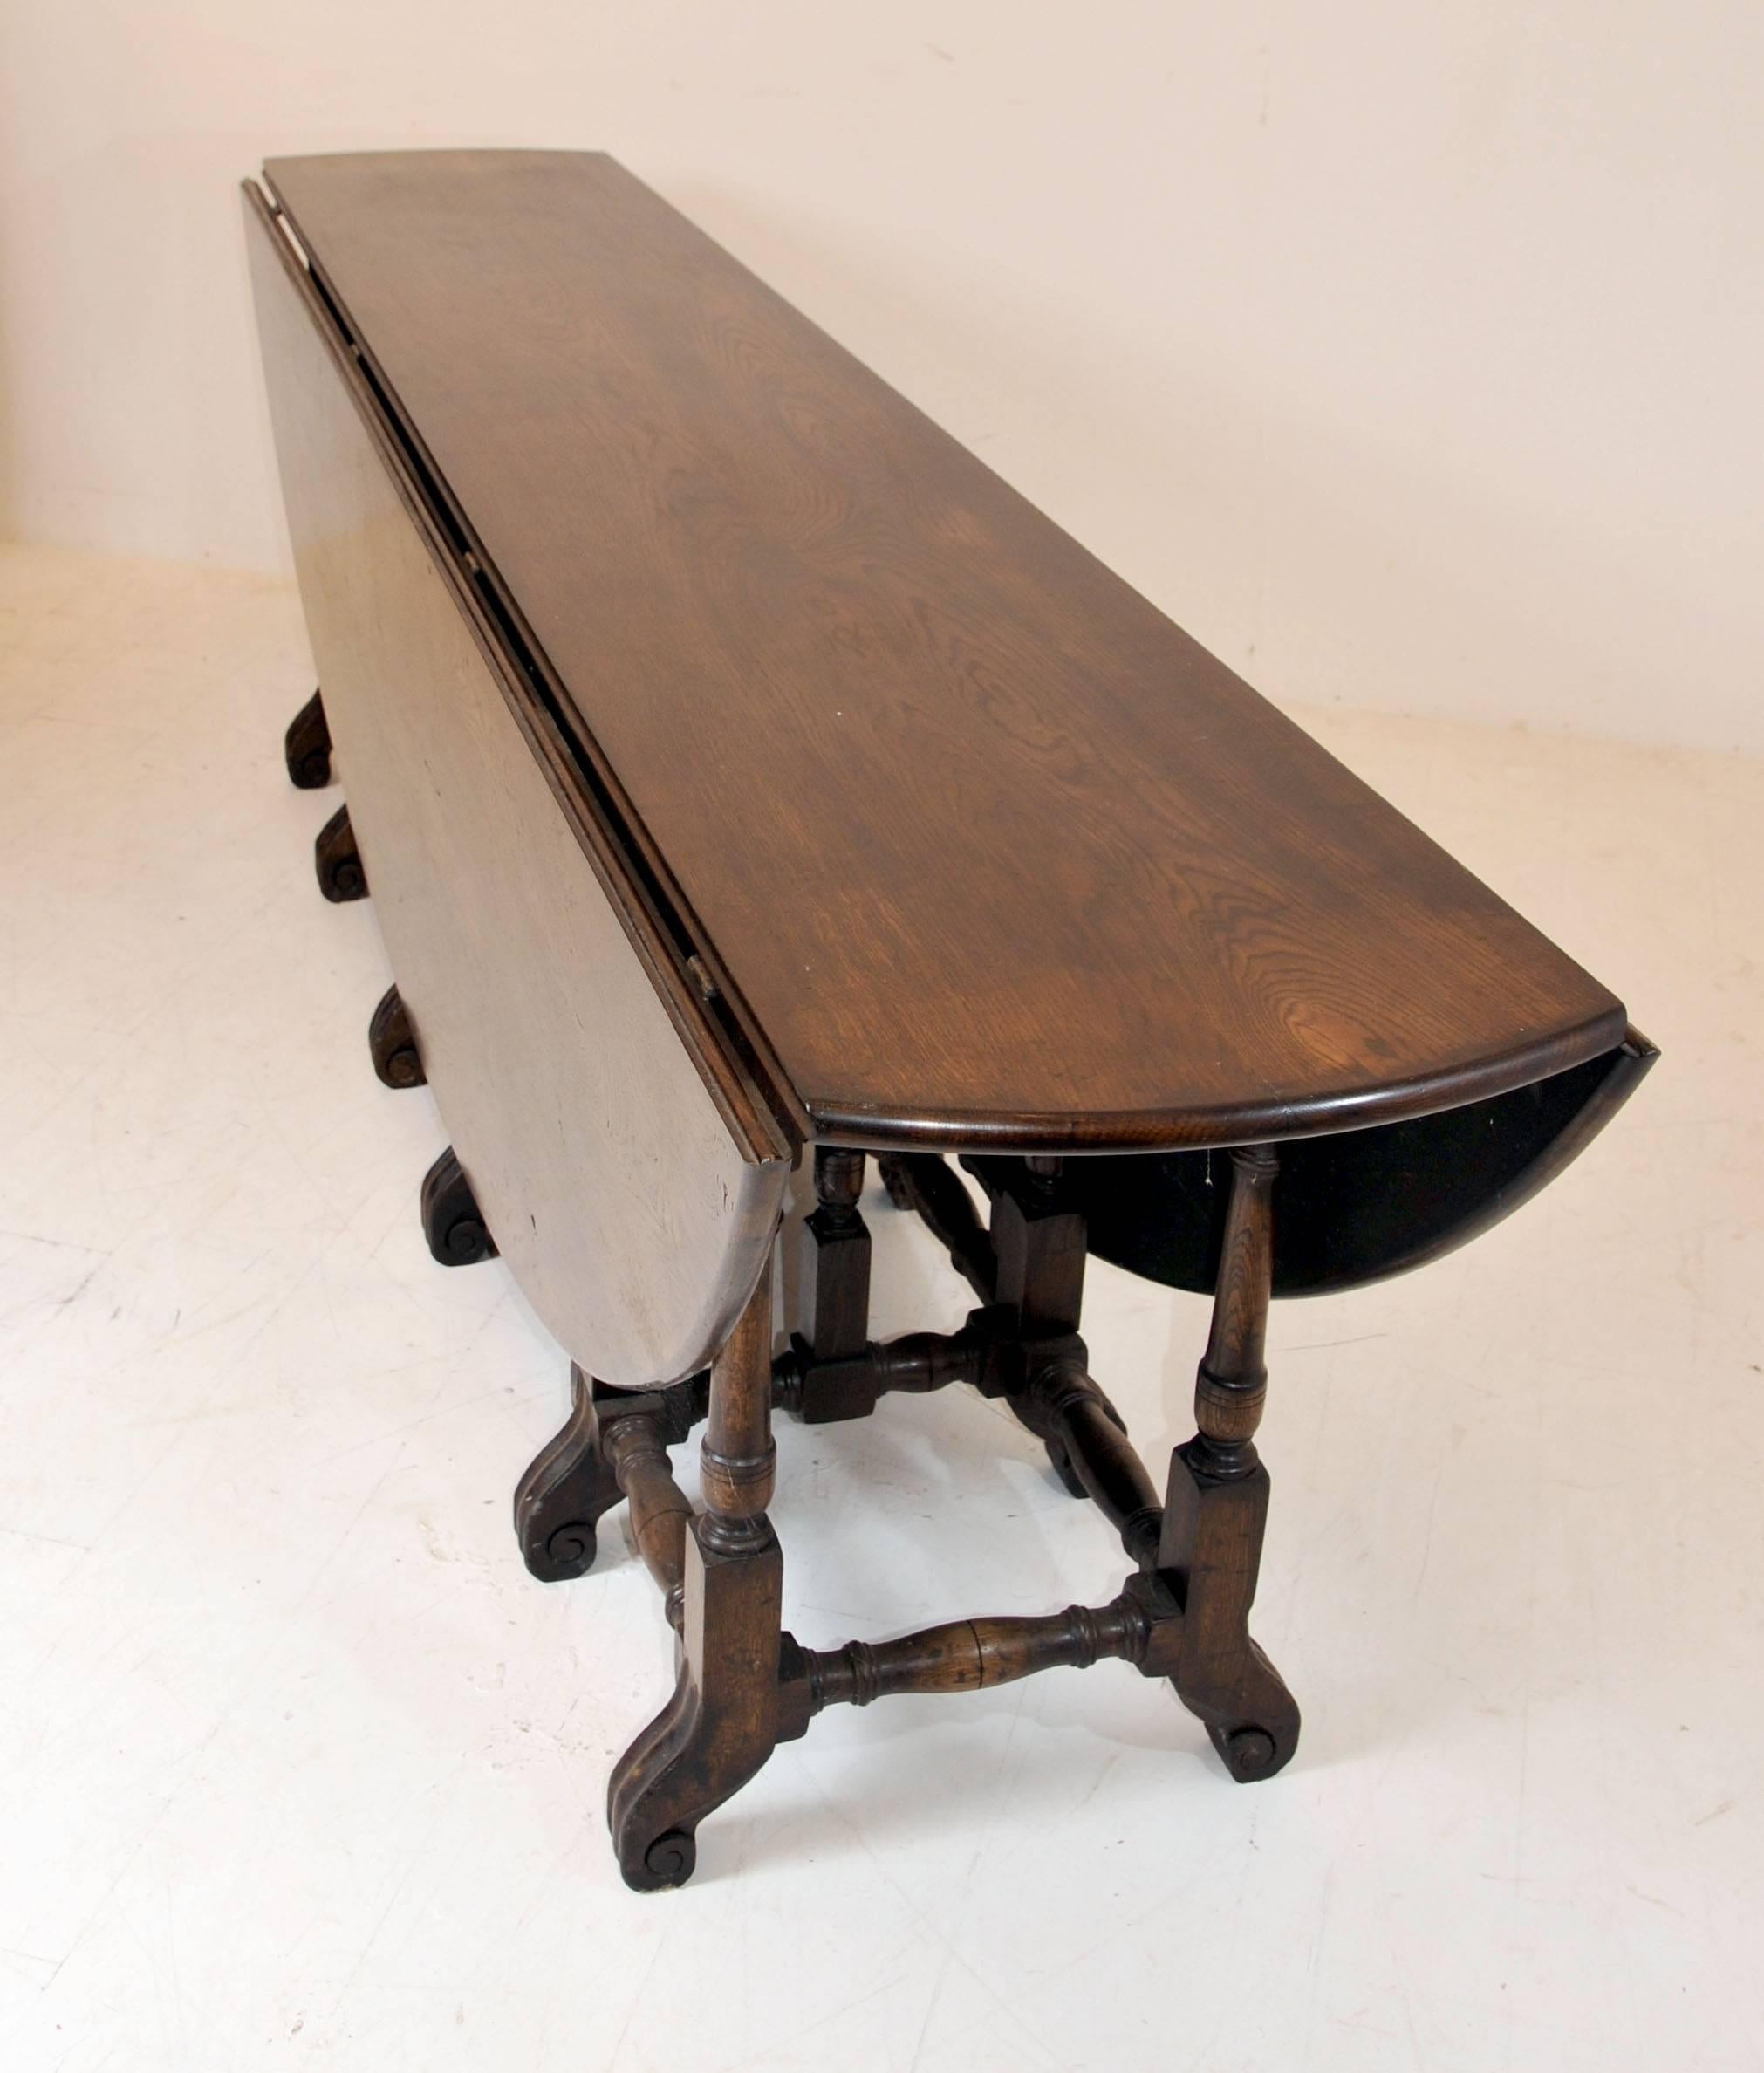 Gorgeous English wakes table in oak.
Measures over eight feet long so great size to this table.
When open with both folding leaves set up nice large oval shape.
The term 'wakes' table comes from the fact these tables would have been used at a